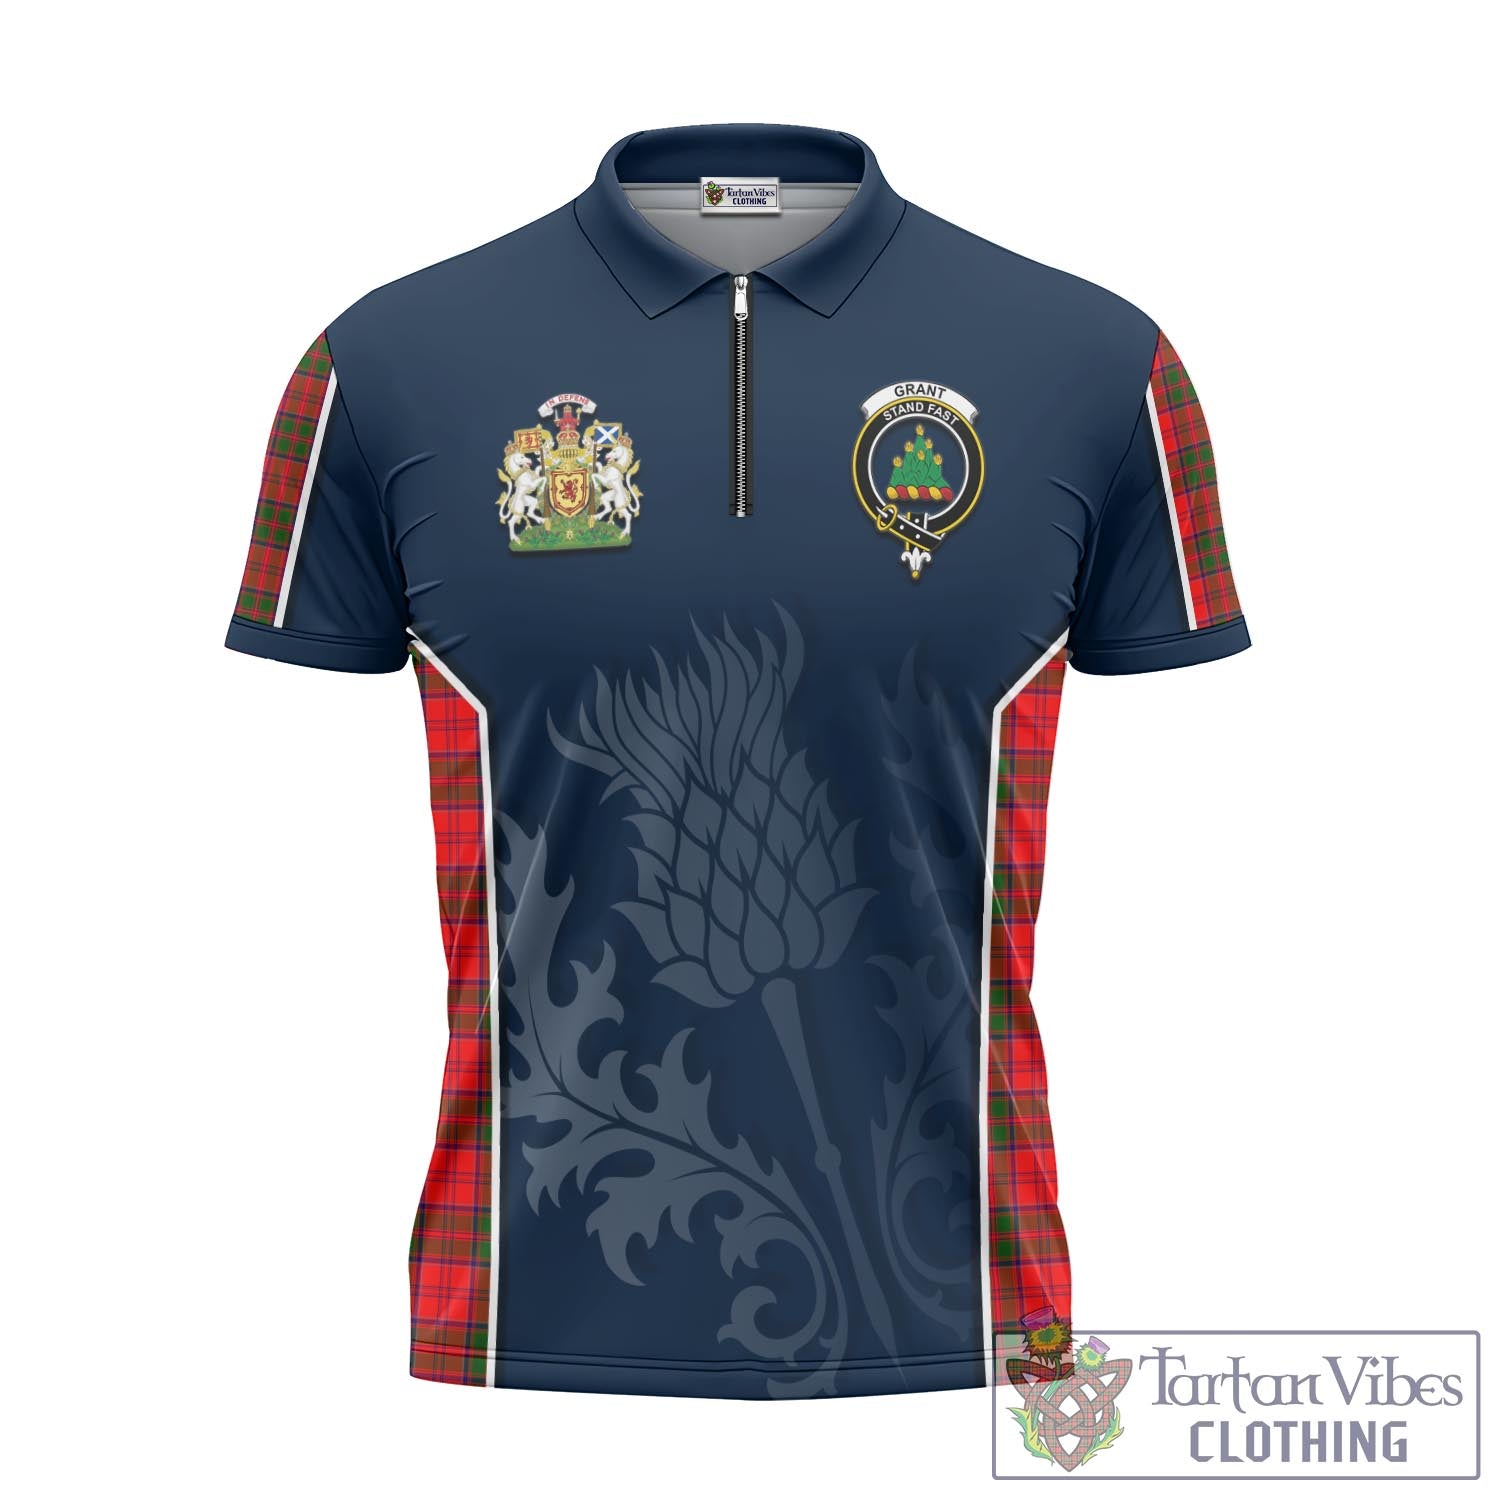 Tartan Vibes Clothing Grant Modern Tartan Zipper Polo Shirt with Family Crest and Scottish Thistle Vibes Sport Style